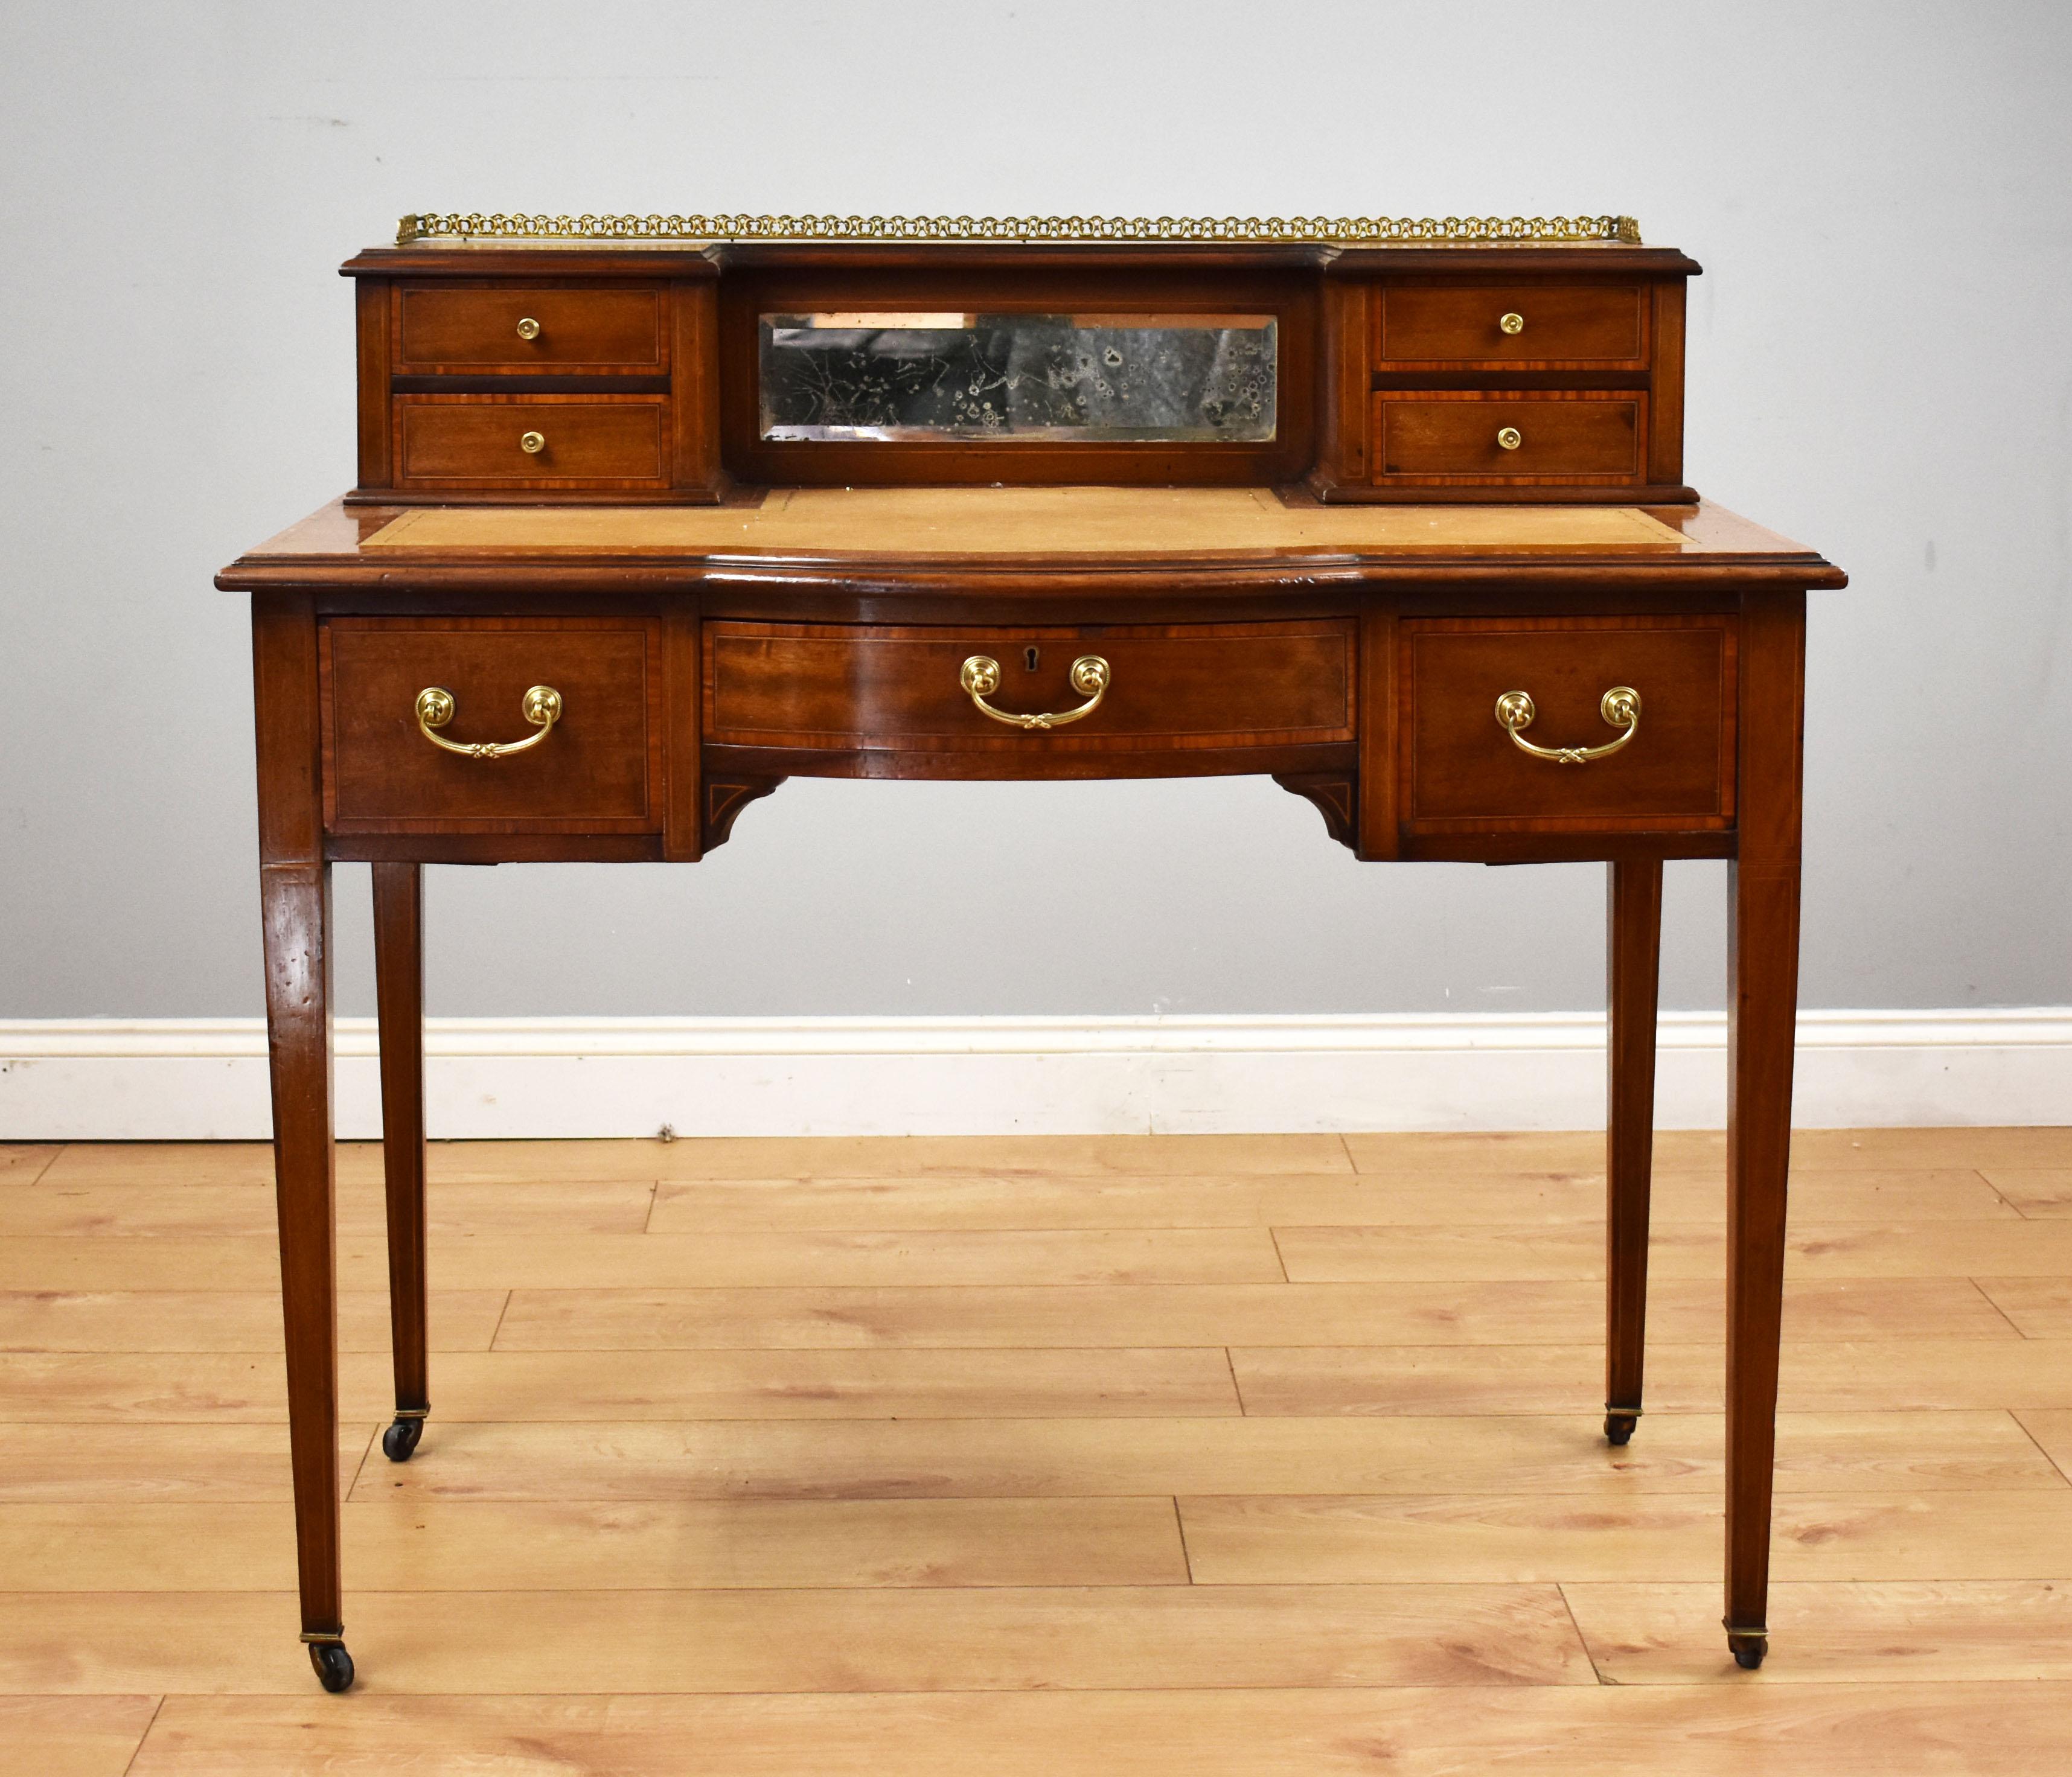 For sale is an Edwardian mahogany writing table, with a rear upstand with drawers and a mirror, tooled leather writing surface and a satinwood banded edge, having three frieze drawers below. The desk stands on elegant tapered legs terminating on